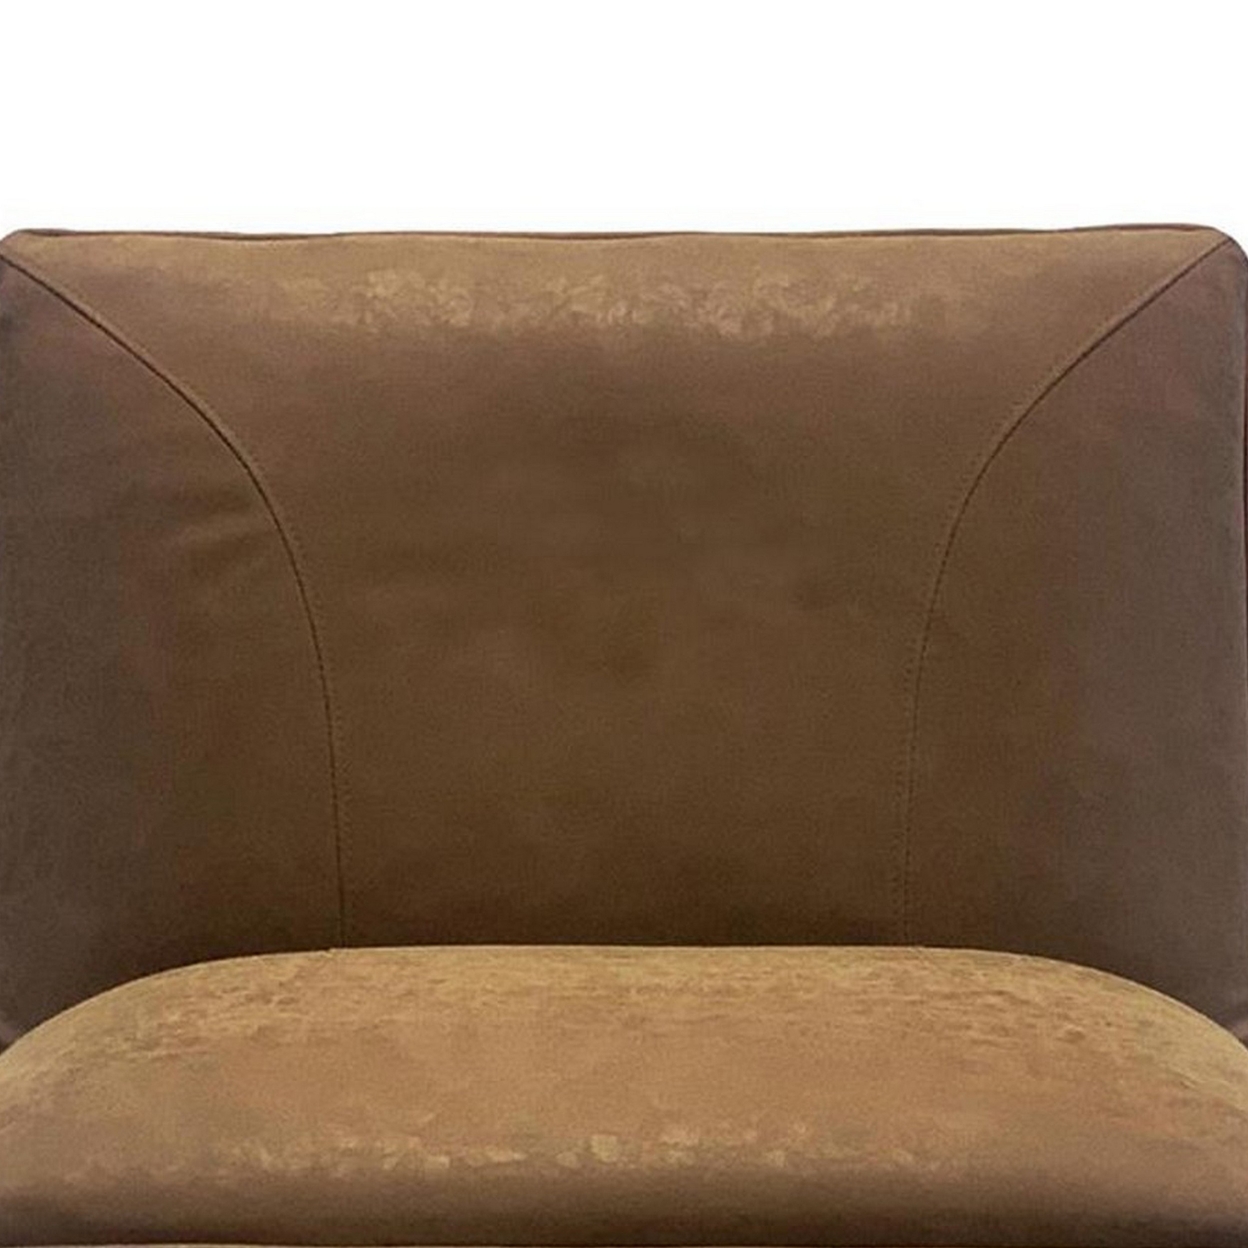 28 Inch Accent Chair With Double Layered Cushions, Brown Microfiber Suede- Saltoro Sherpi